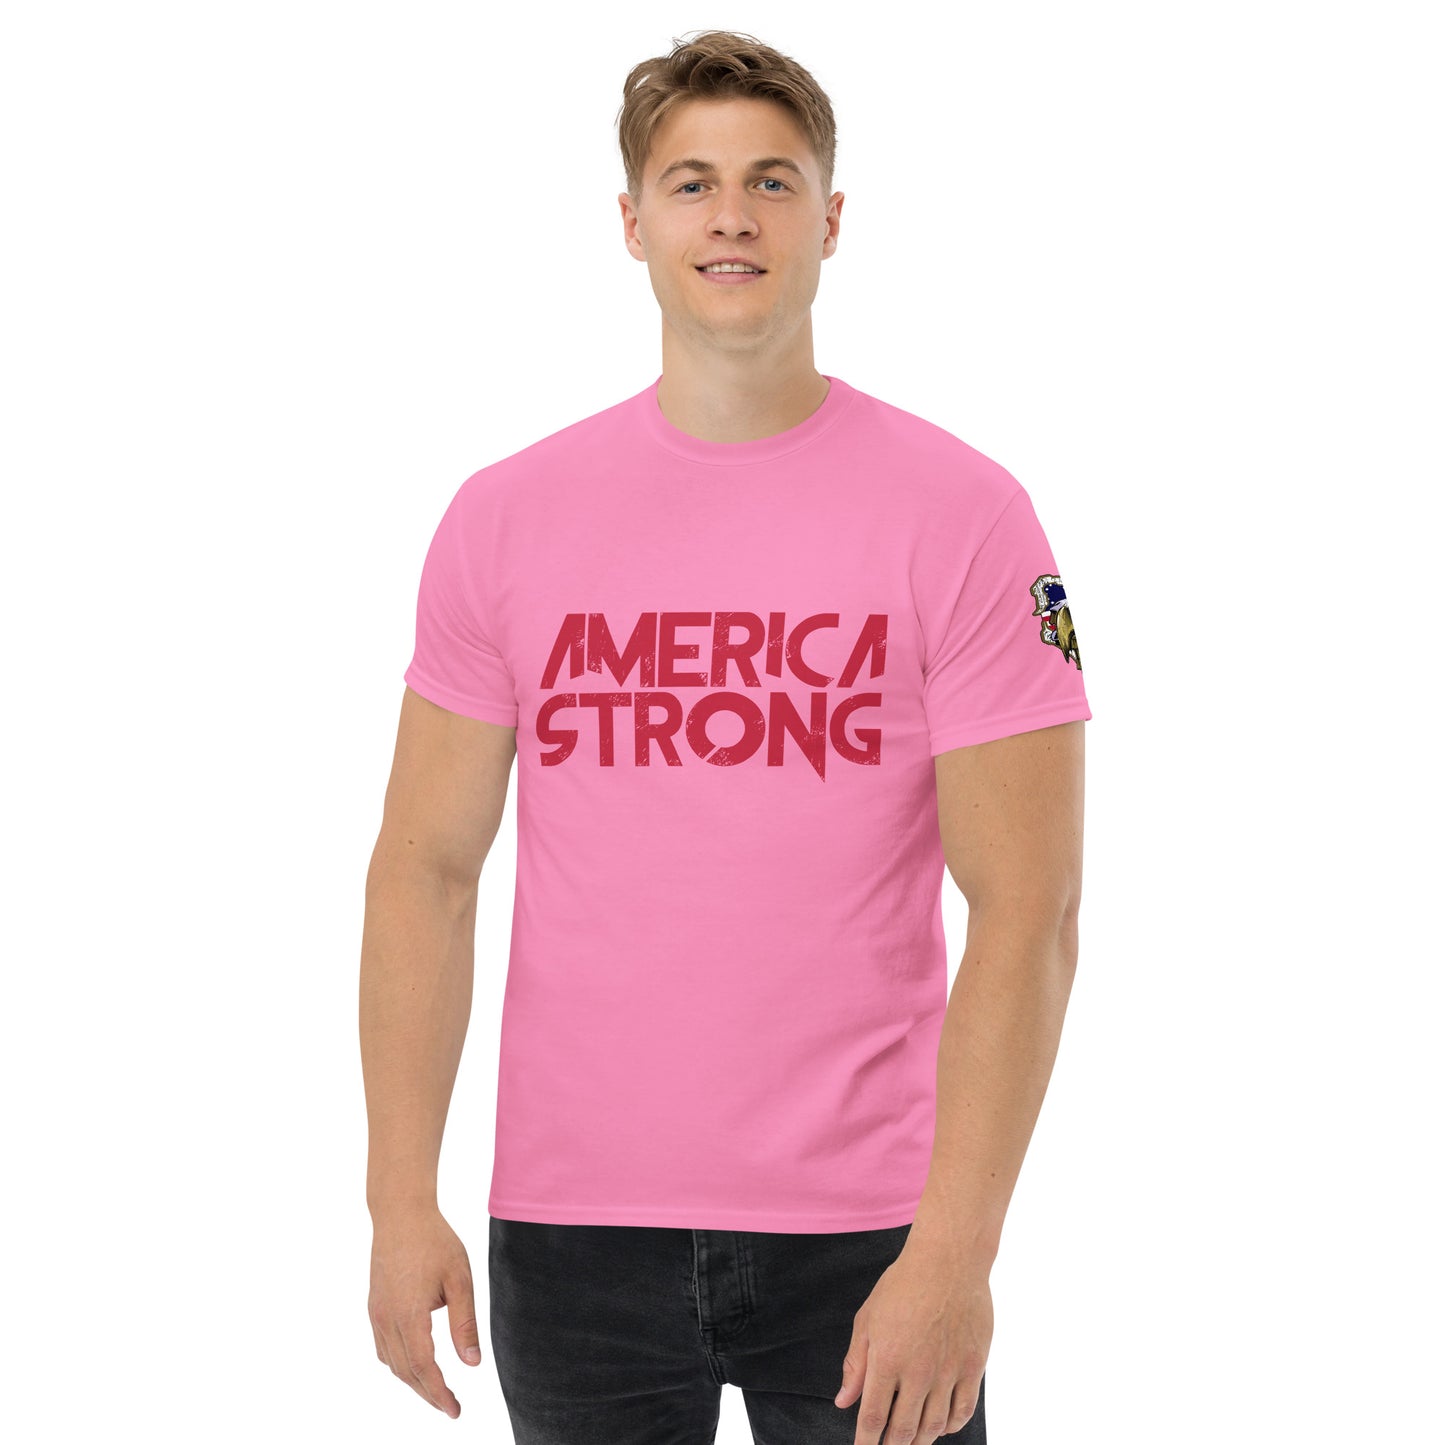 America Strong